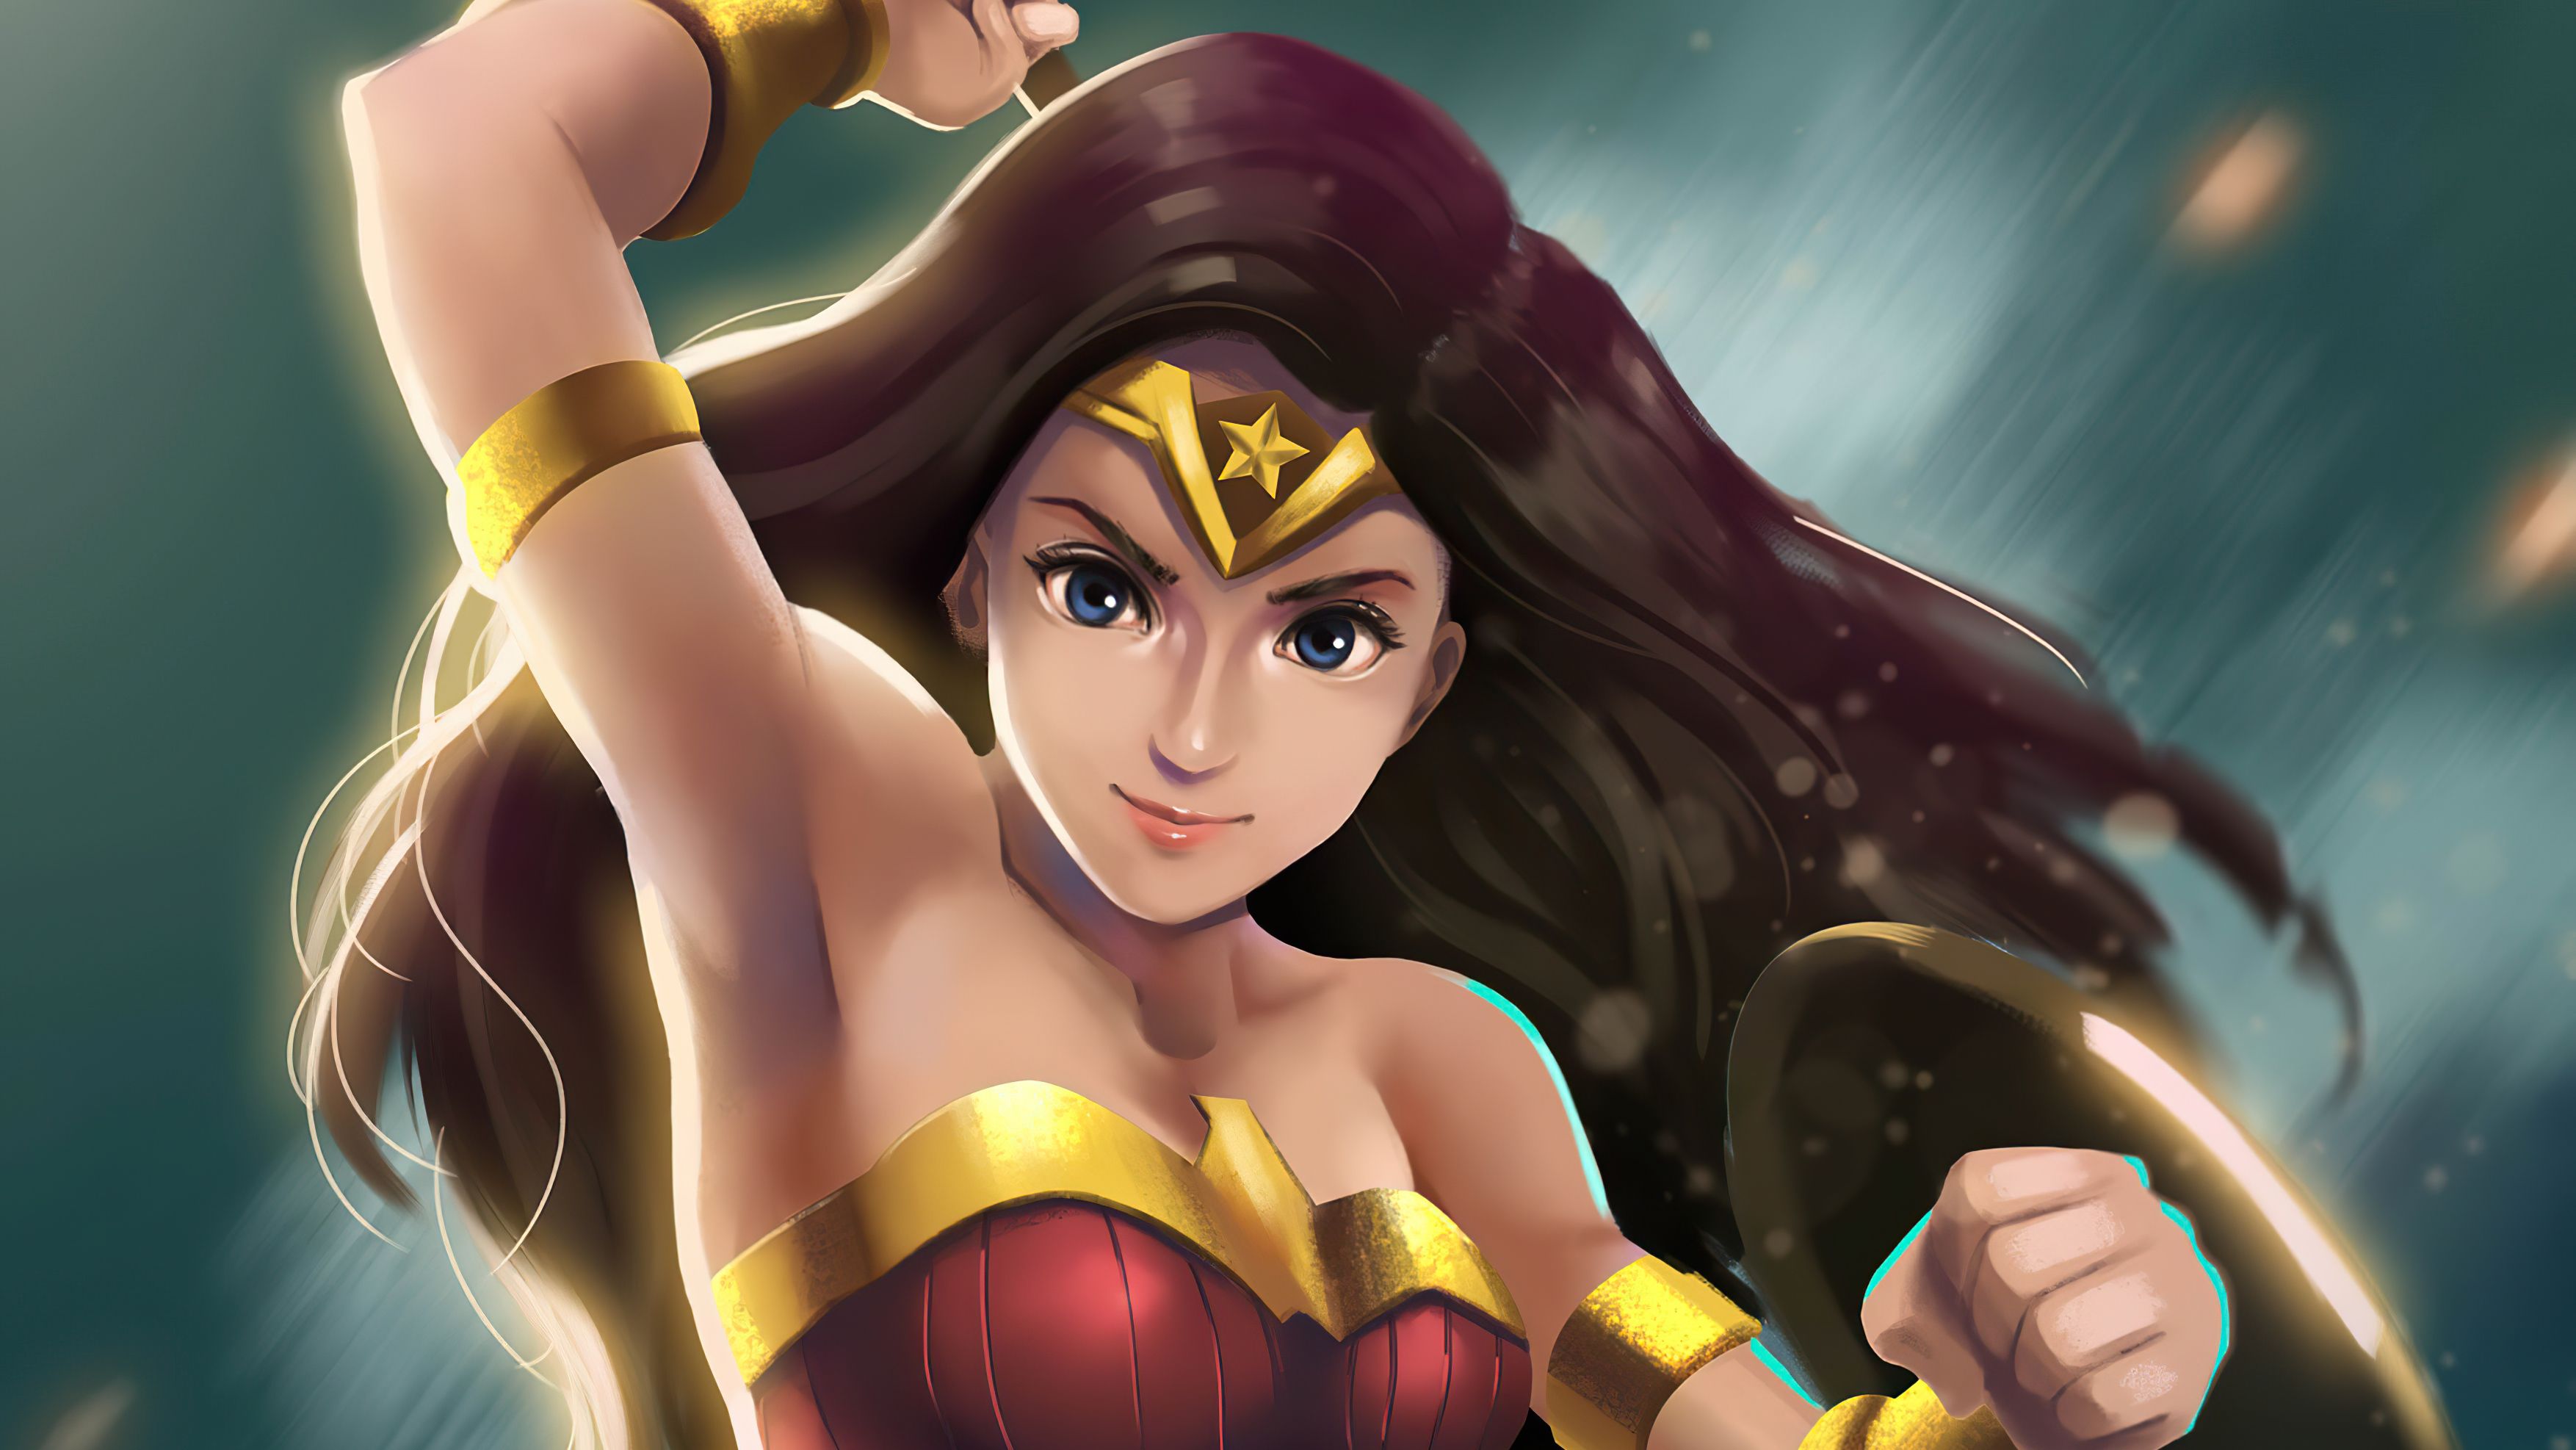 Wonder Woman Cute Girl Artwork, HD Superheroes, 4k Wallpaper, Image, Background, Photo and Picture